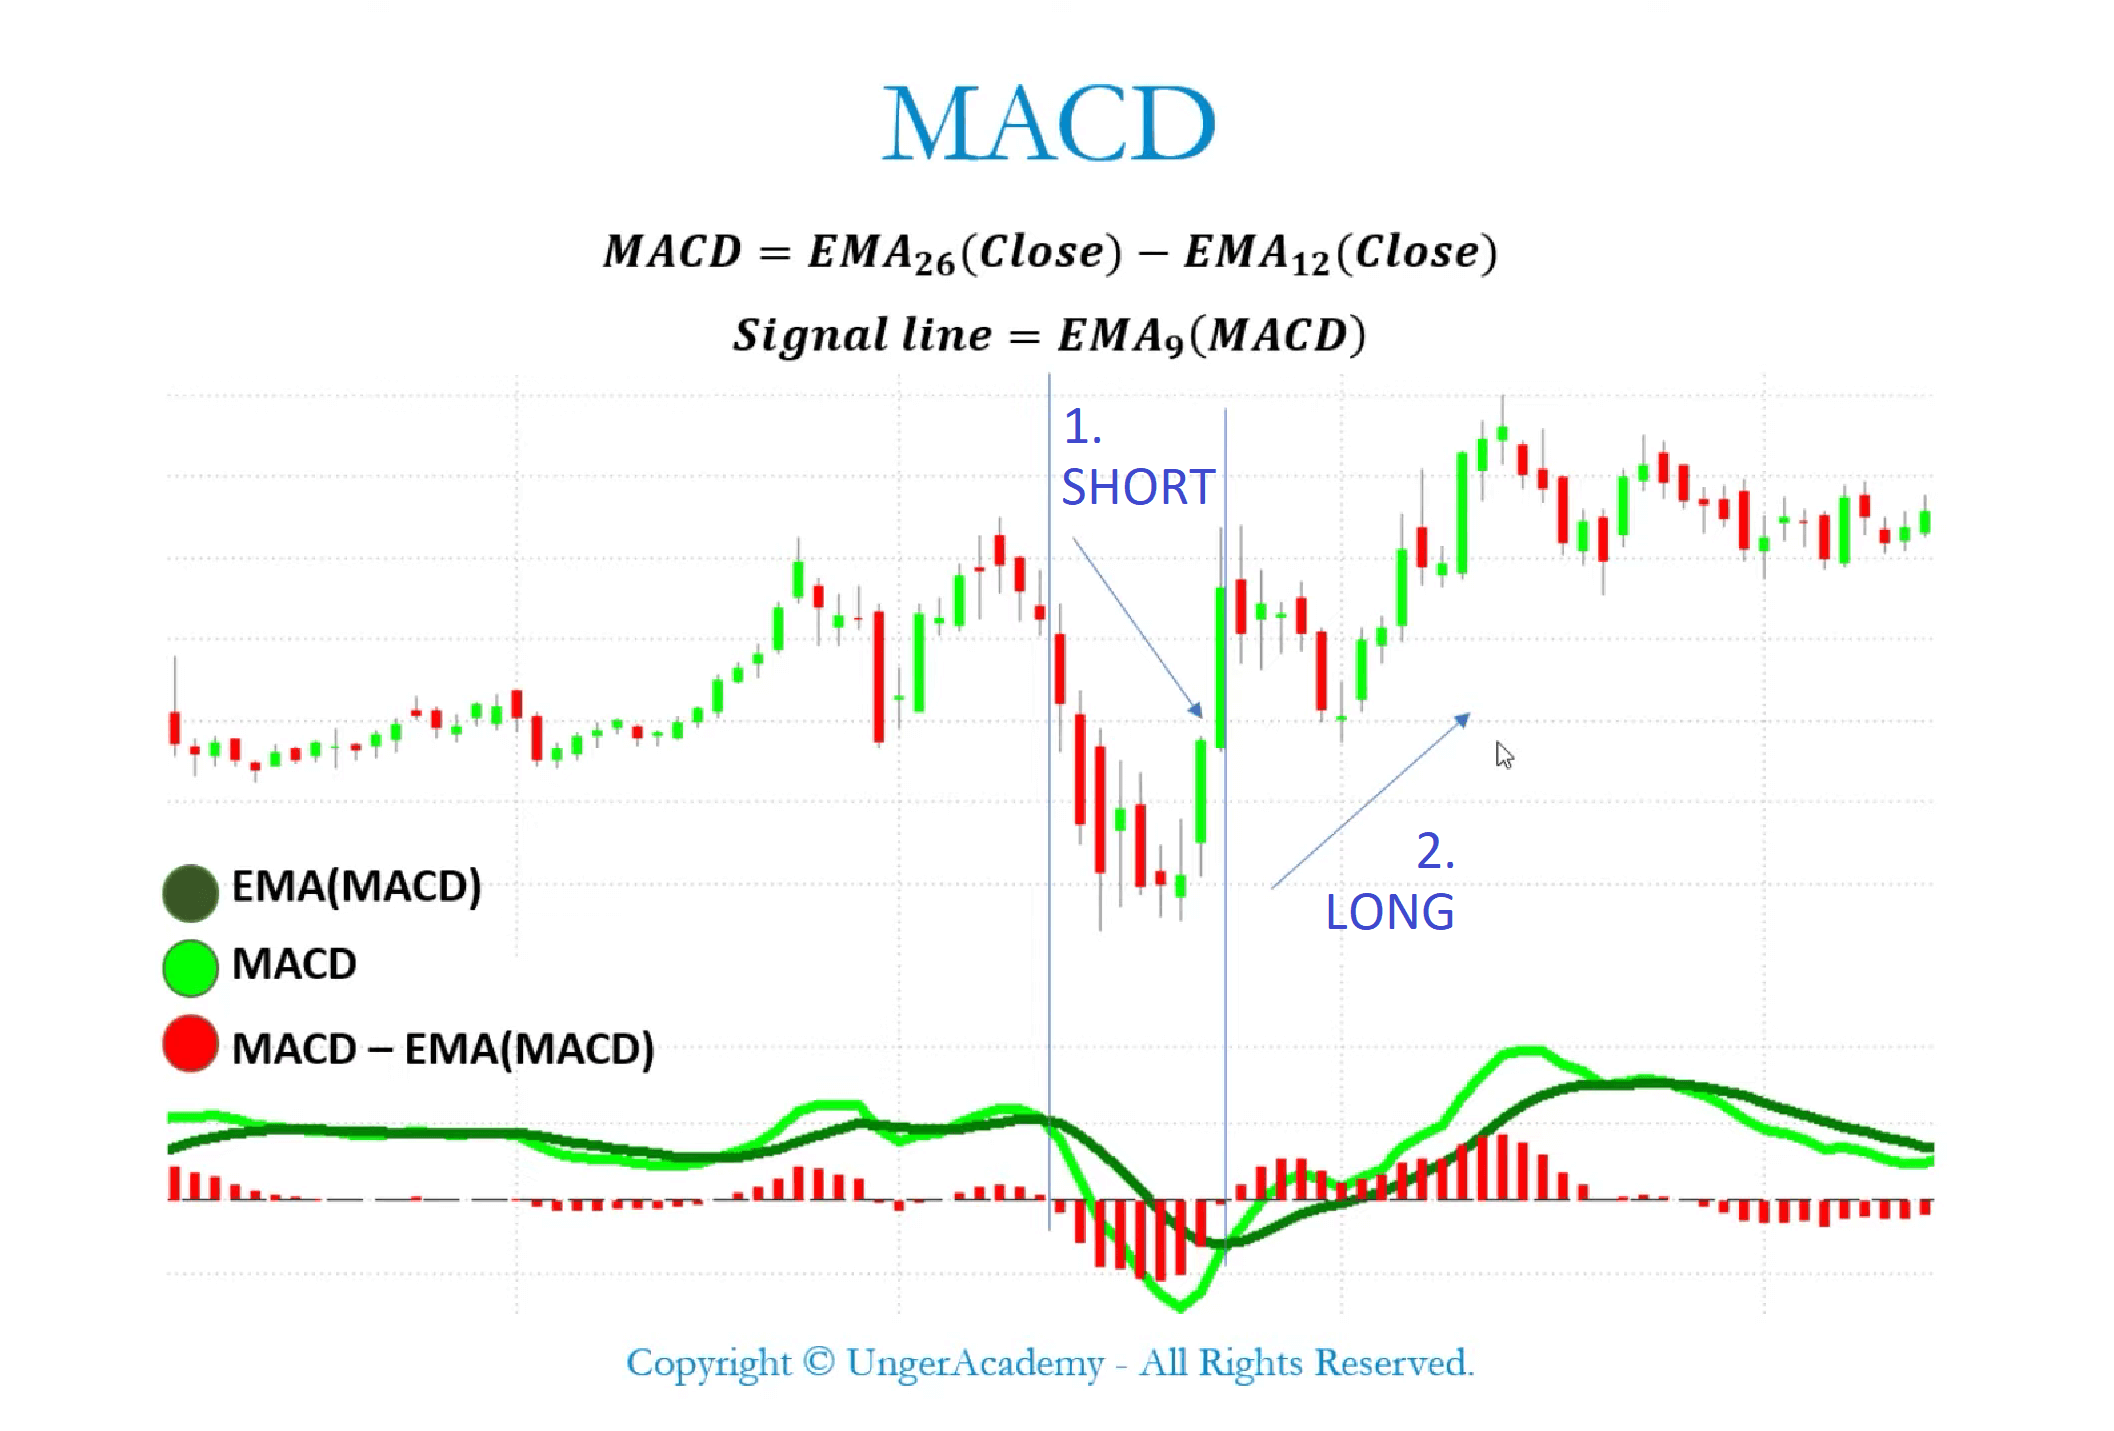 trading signals generated by MACD indicator 